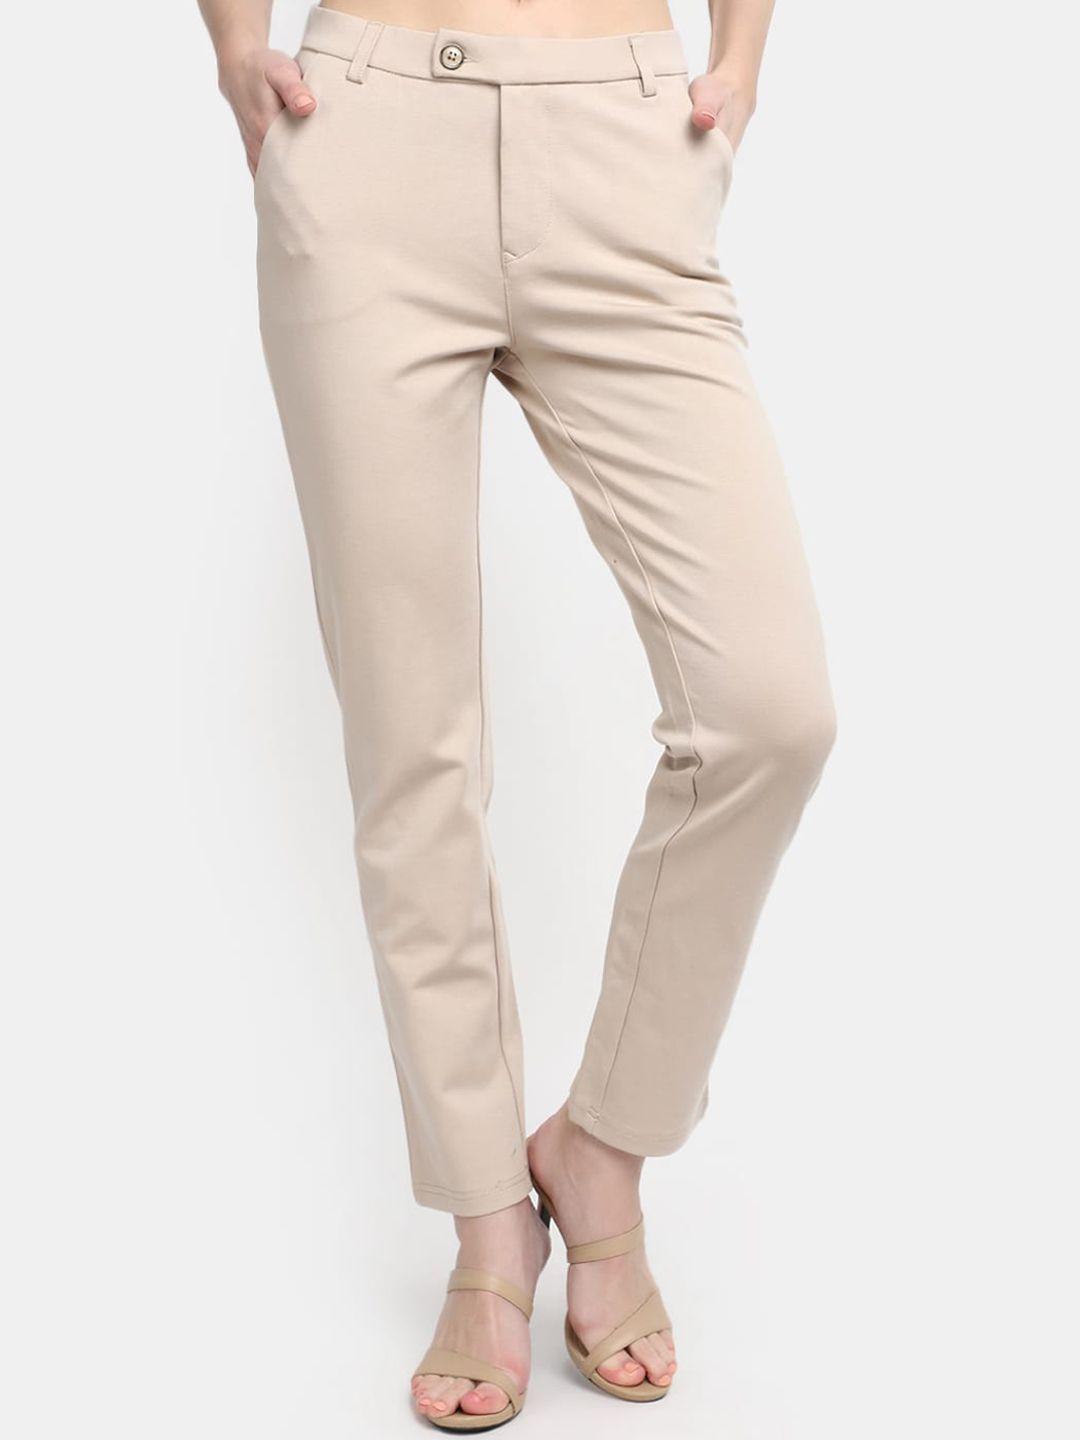 v-mart women mid-rise cotton formal trousers